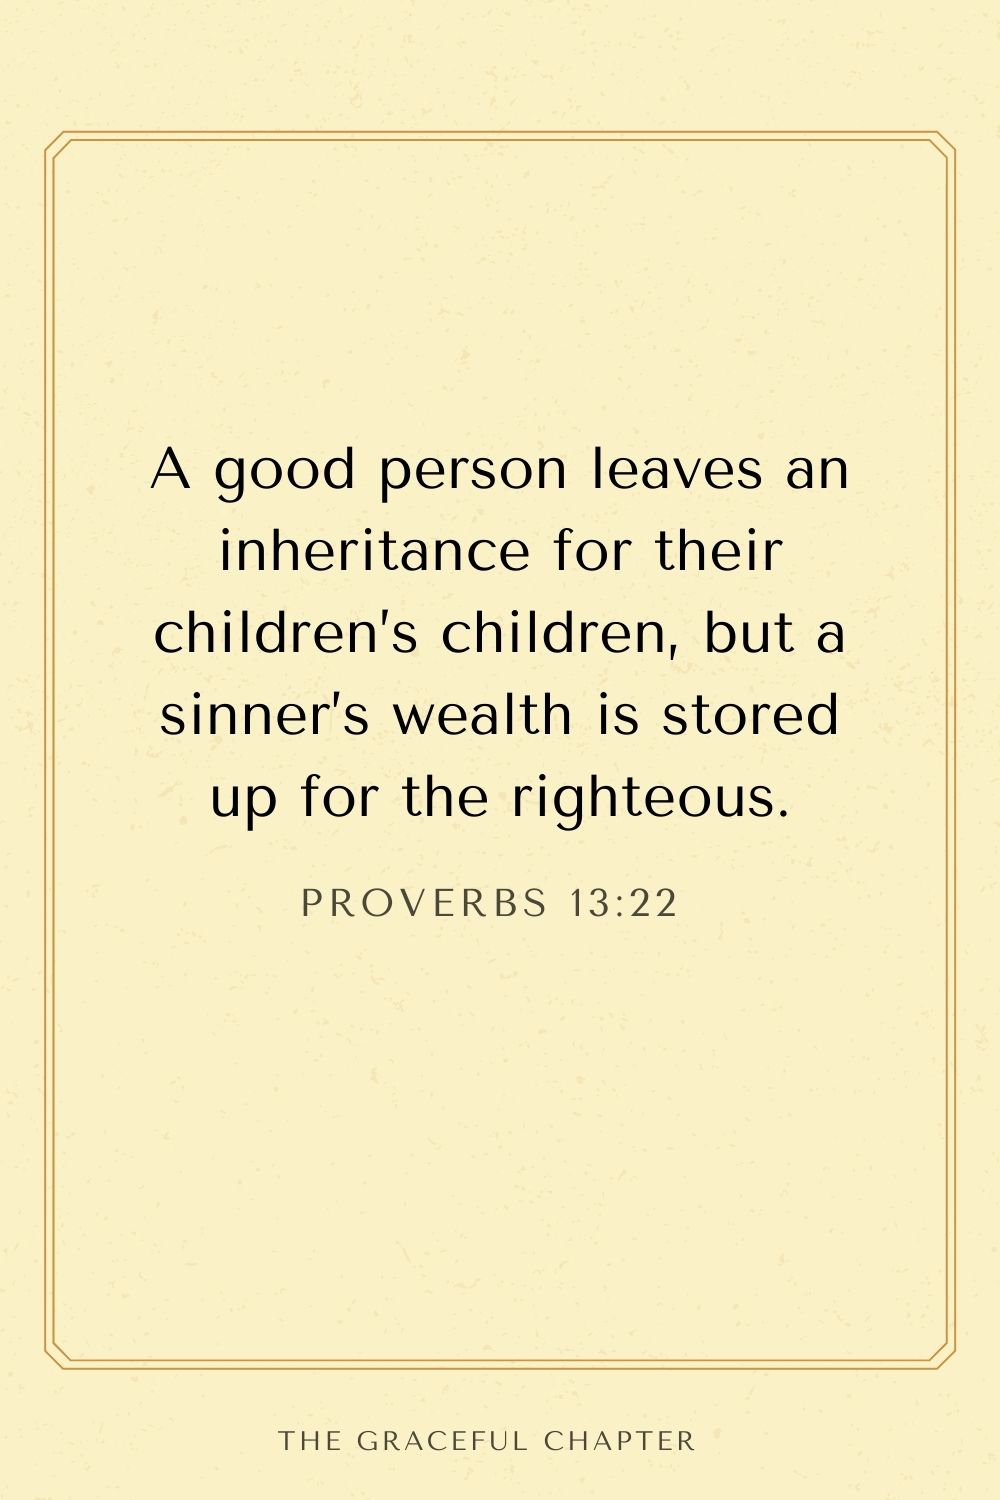 A good person leaves an inheritance for their children’s children, but a sinner’s wealth is stored up for the righteous. Proverbs 13:22